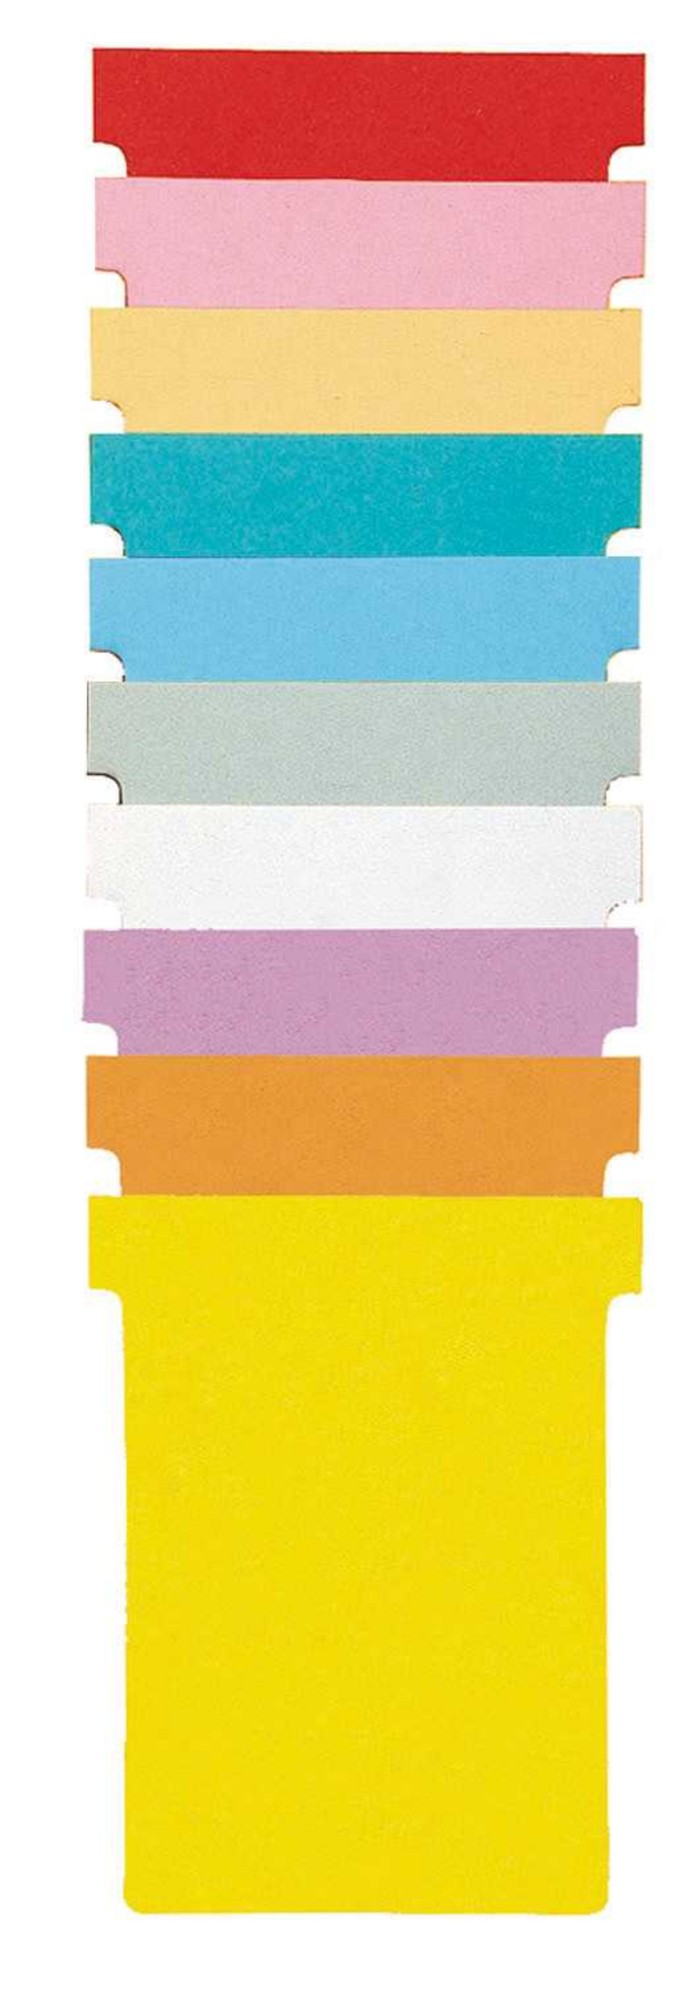 Nobo T-Card Size 4 112 x 180mm Yellow (100 Pack) 2004004